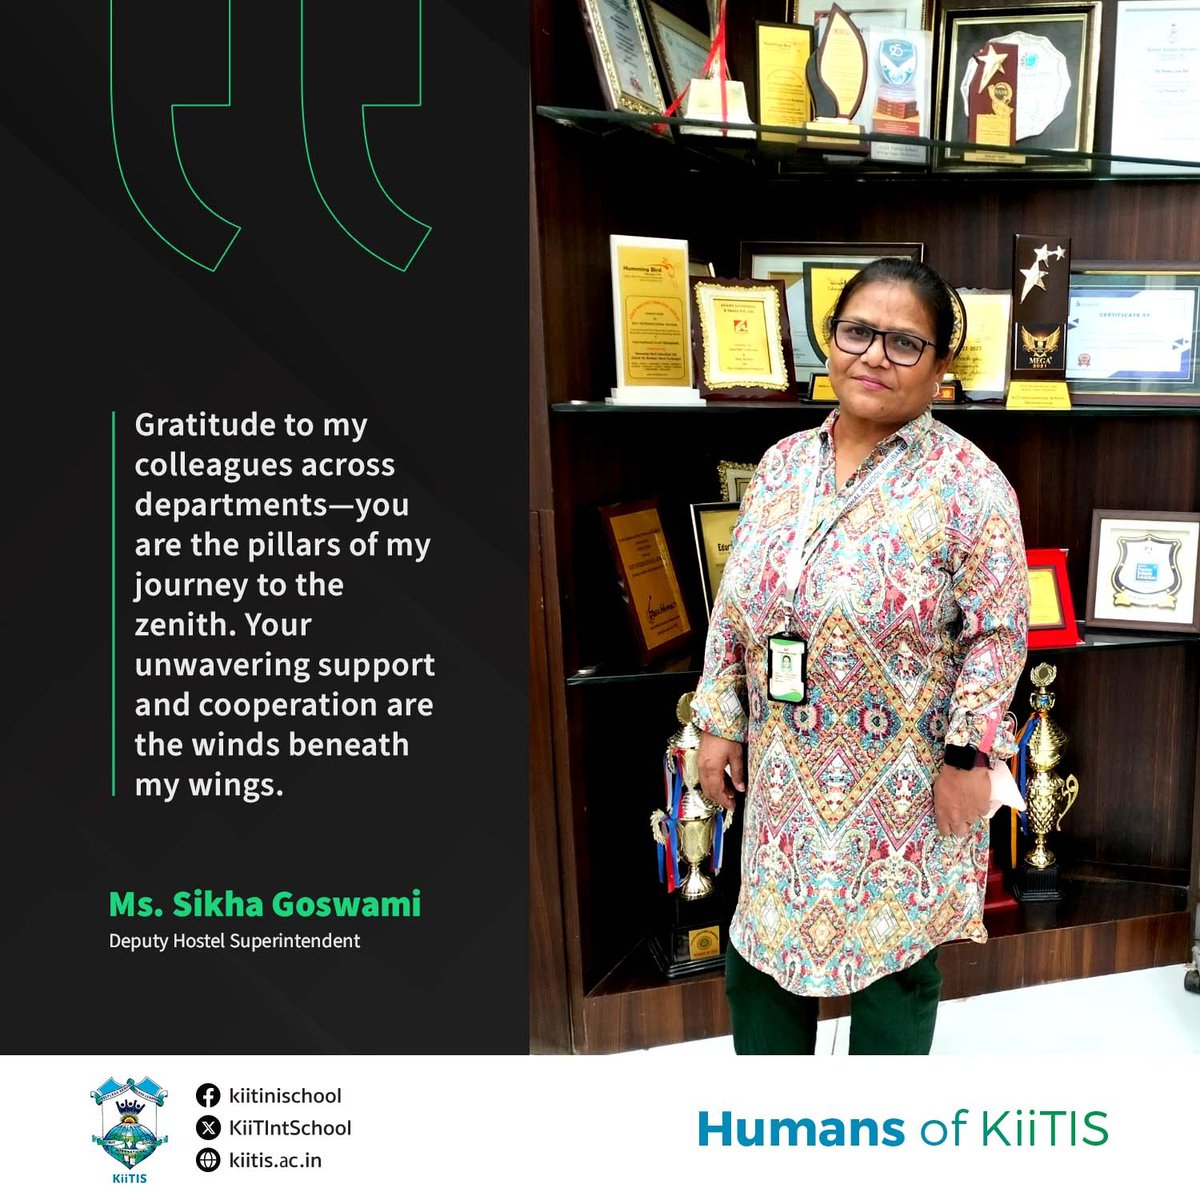 A moment etched in my memory is the recognition I received on January 26, 2020, a testament to the enriching path we tread together at KiiTIS.
To everyone who has been part of my journey, a heartfelt thank you.
Together, we soar higher!

~ Ms. Sikha Goswami

#Humansofkiitis